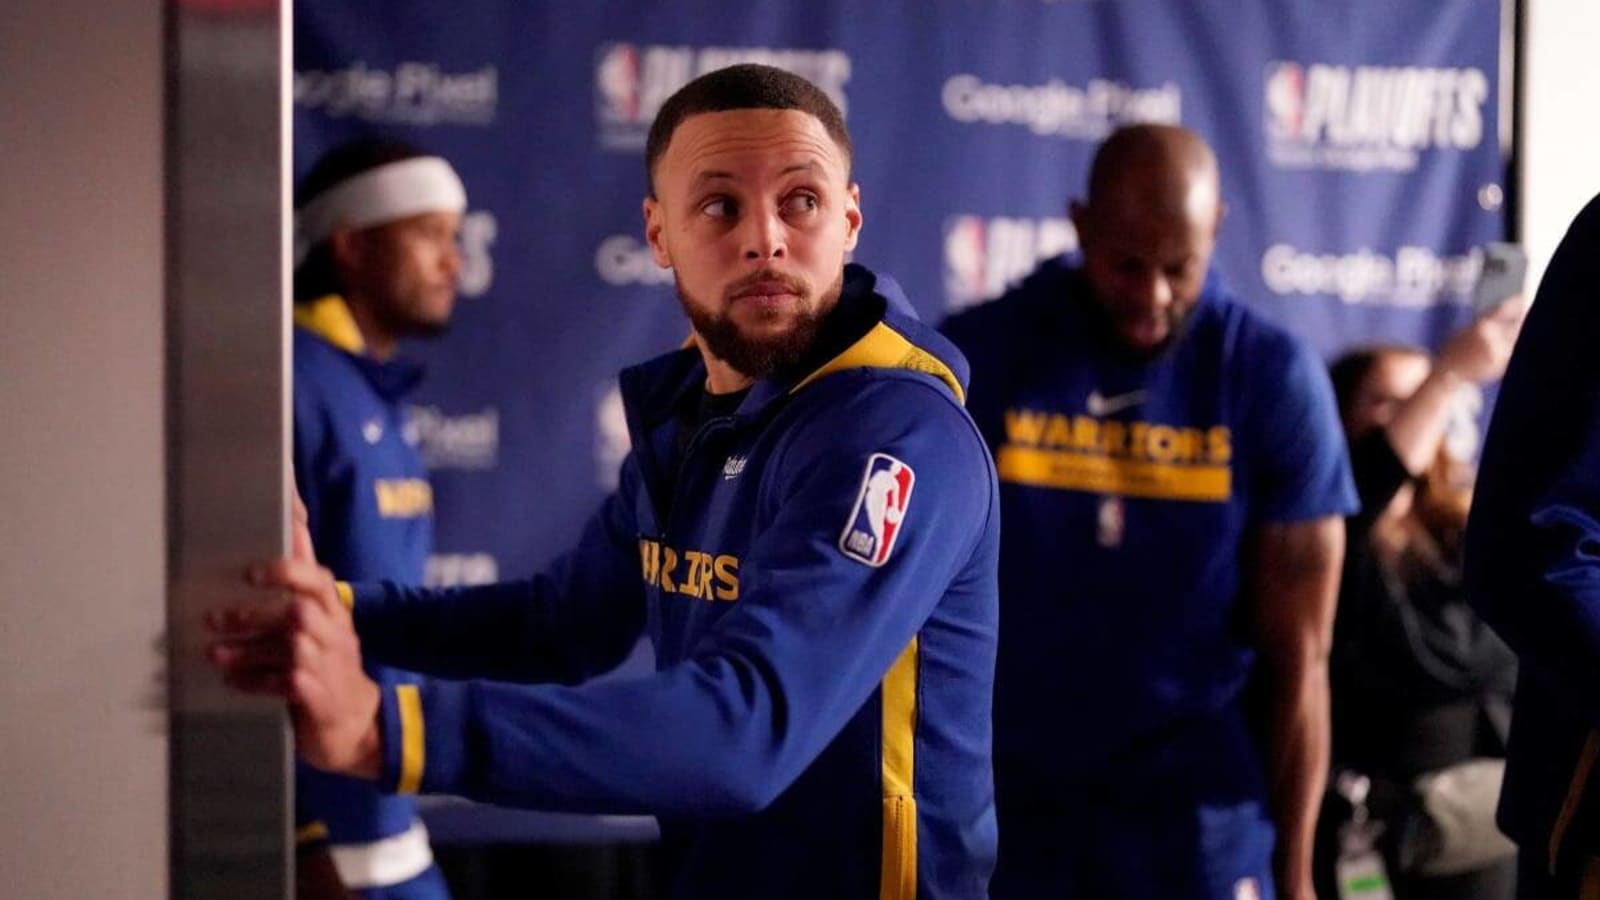 Charles Barkley says “Bad Boy” pistons would destroy Stephen Curry